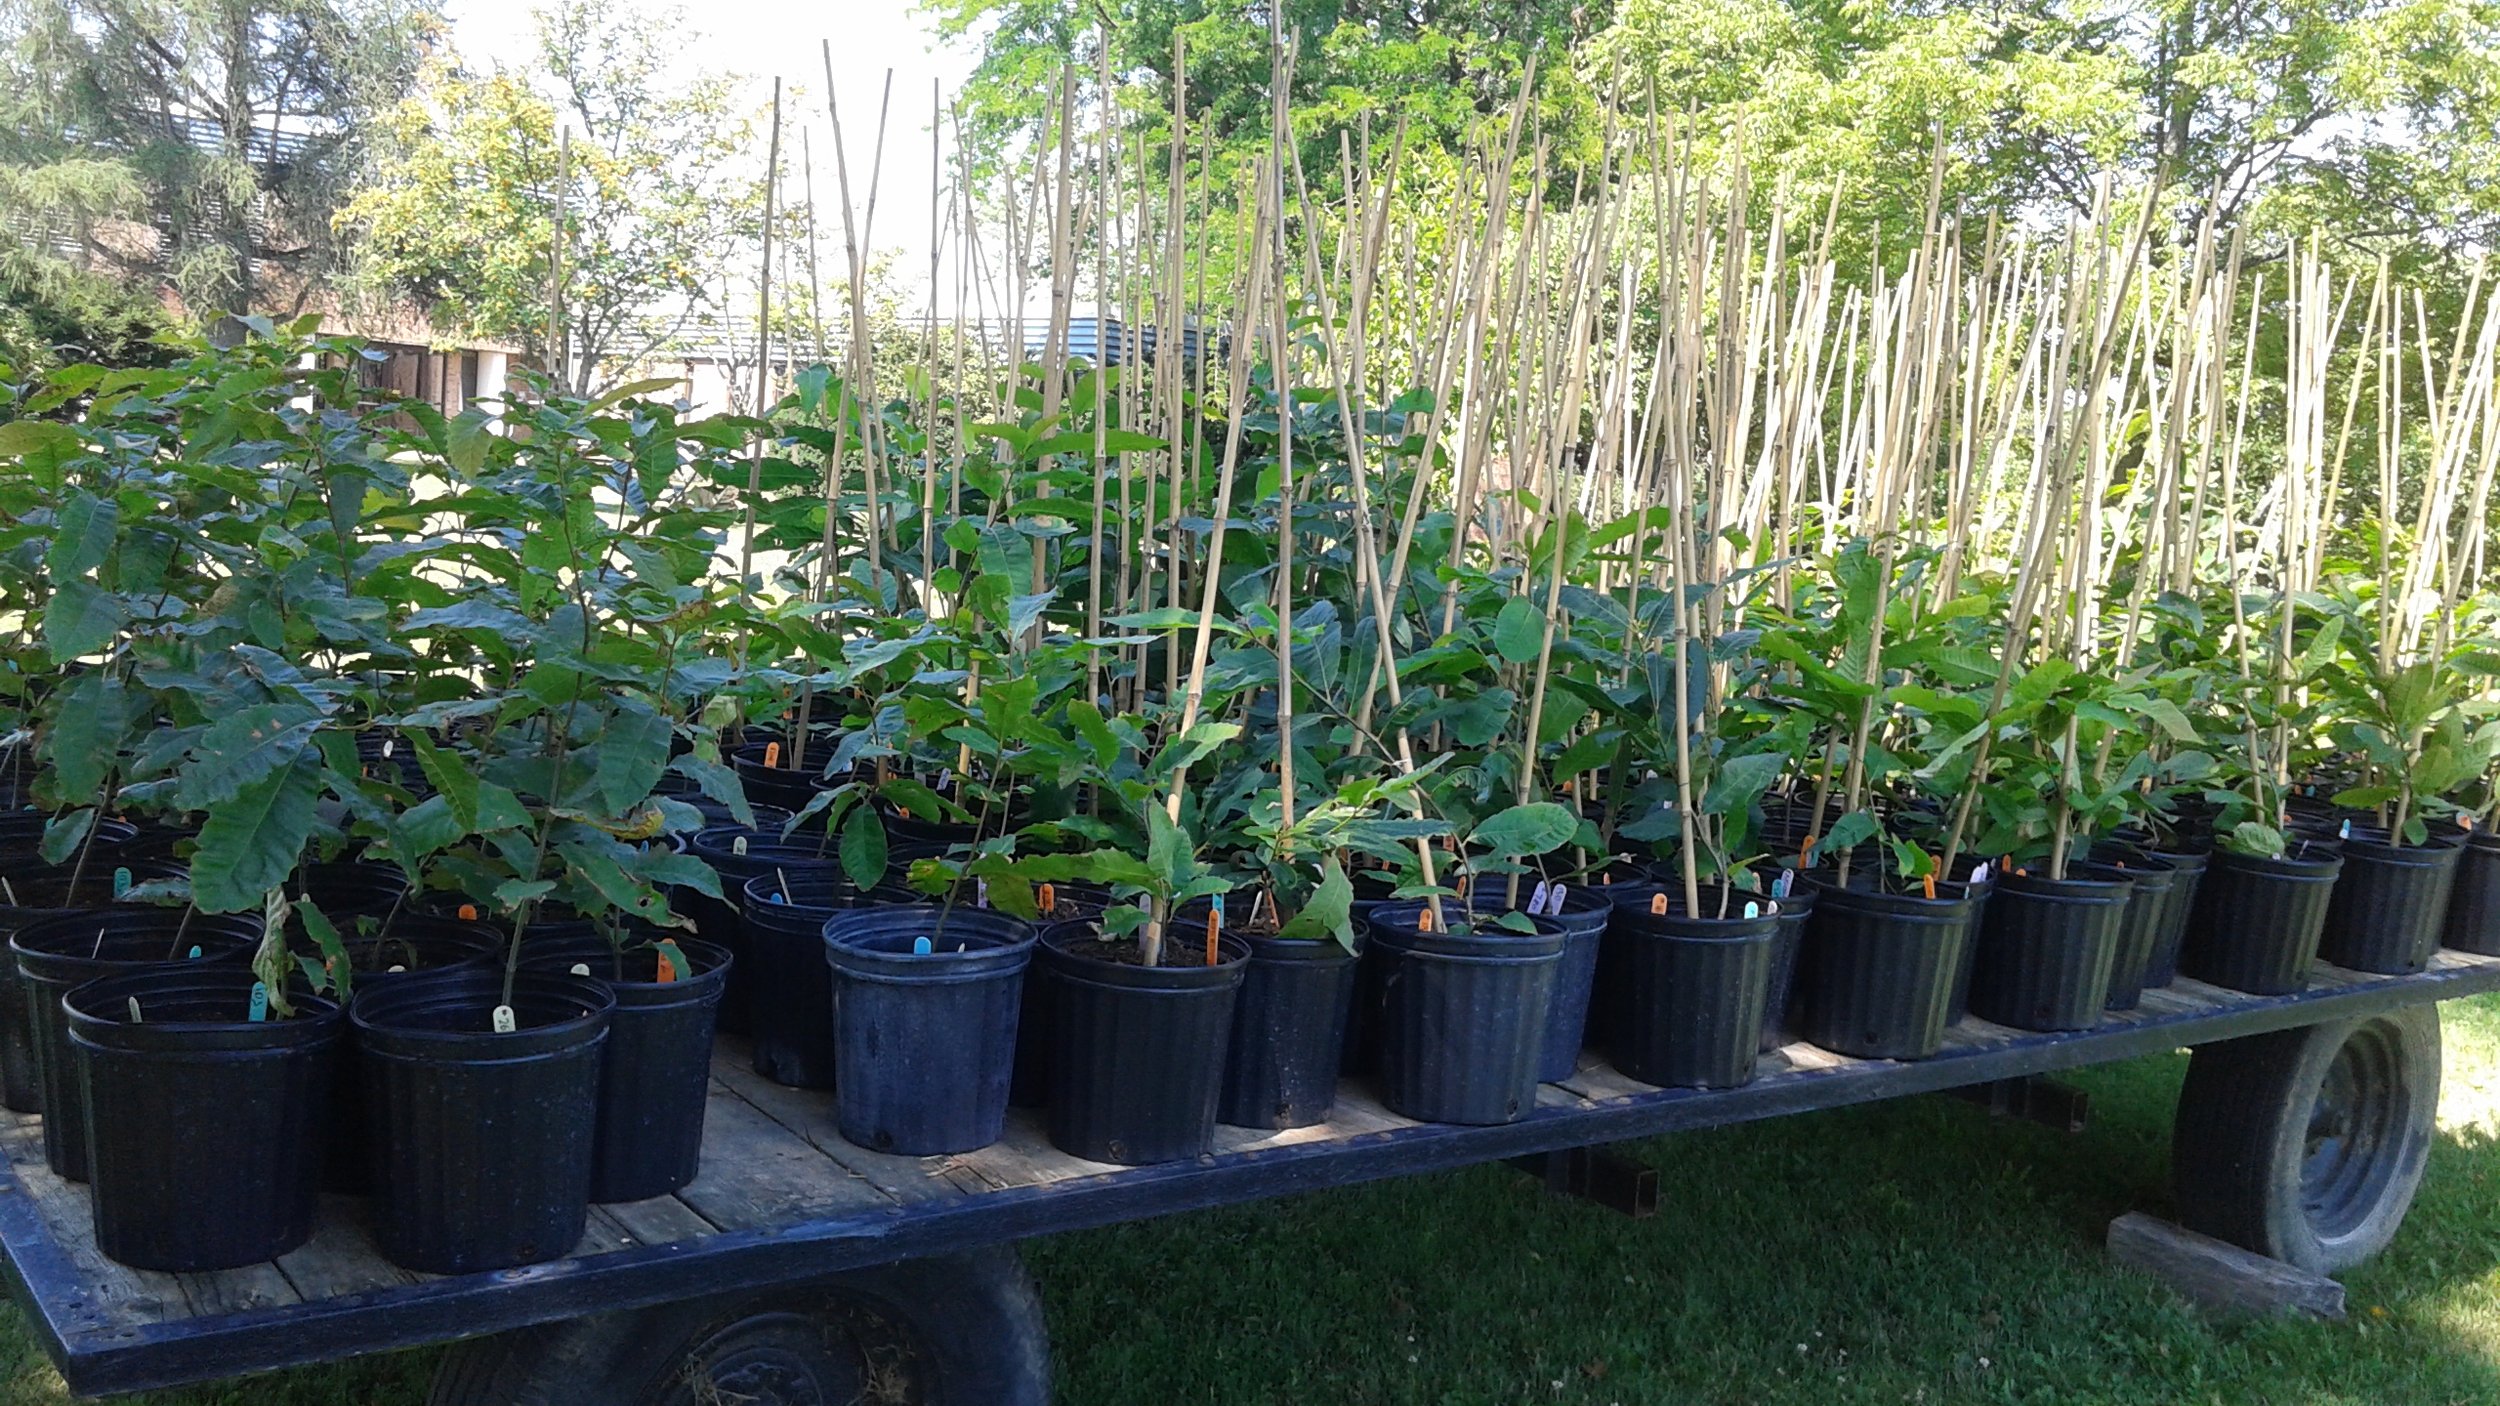 American chestnut trees for trials